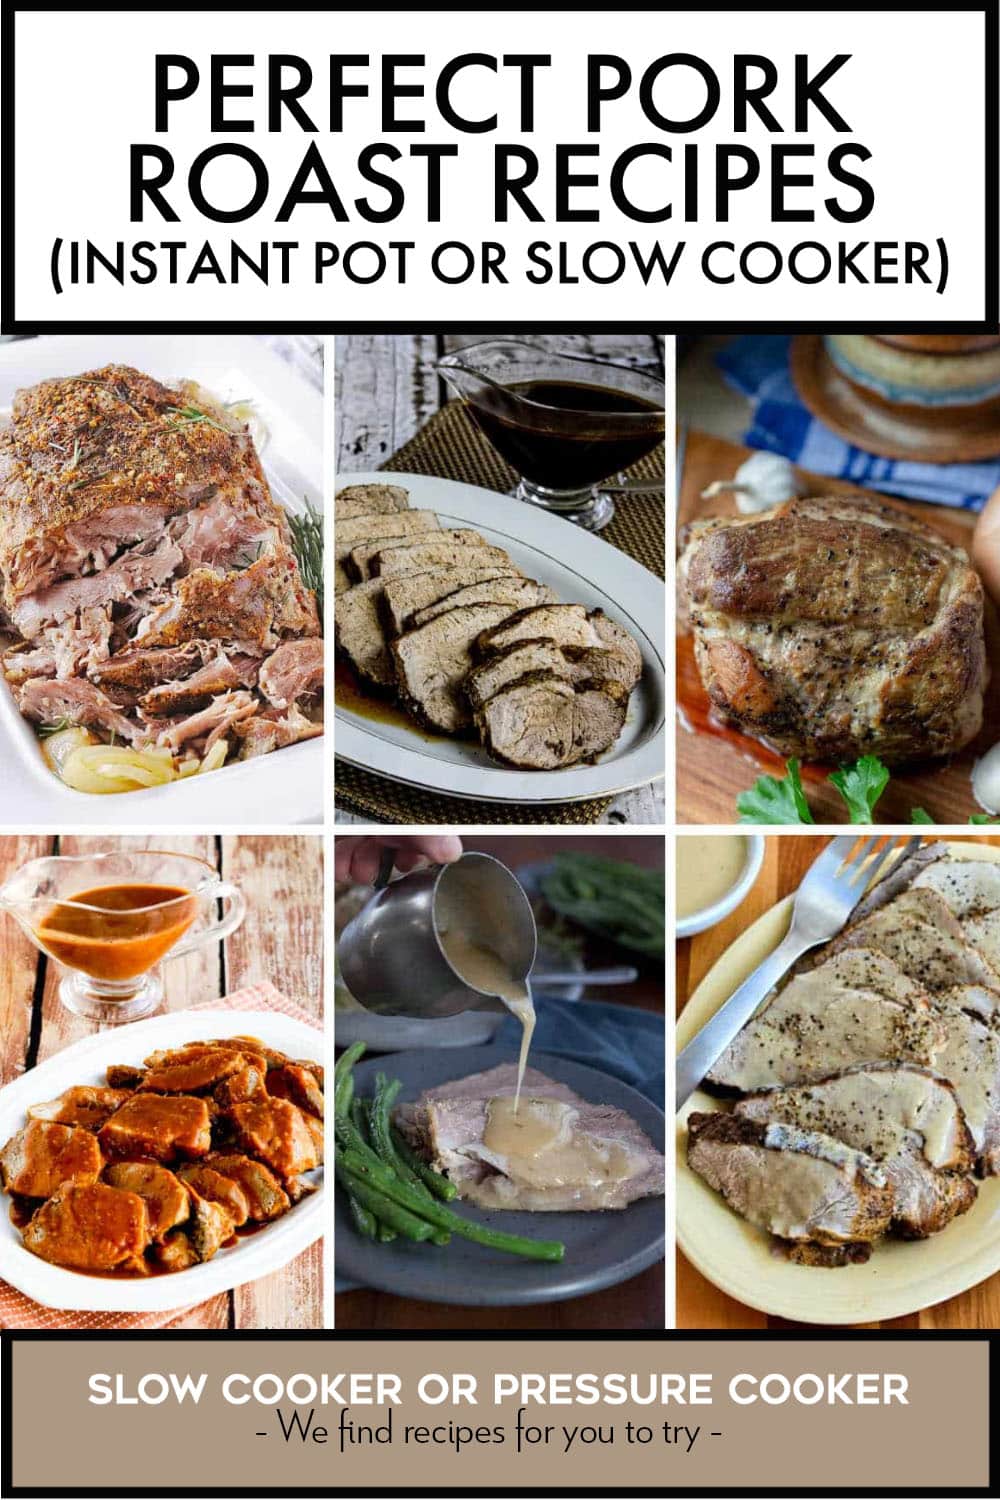 Pinterest image of Perfect Pork Roast Recipes (Instant Pot or Slow Cooker)